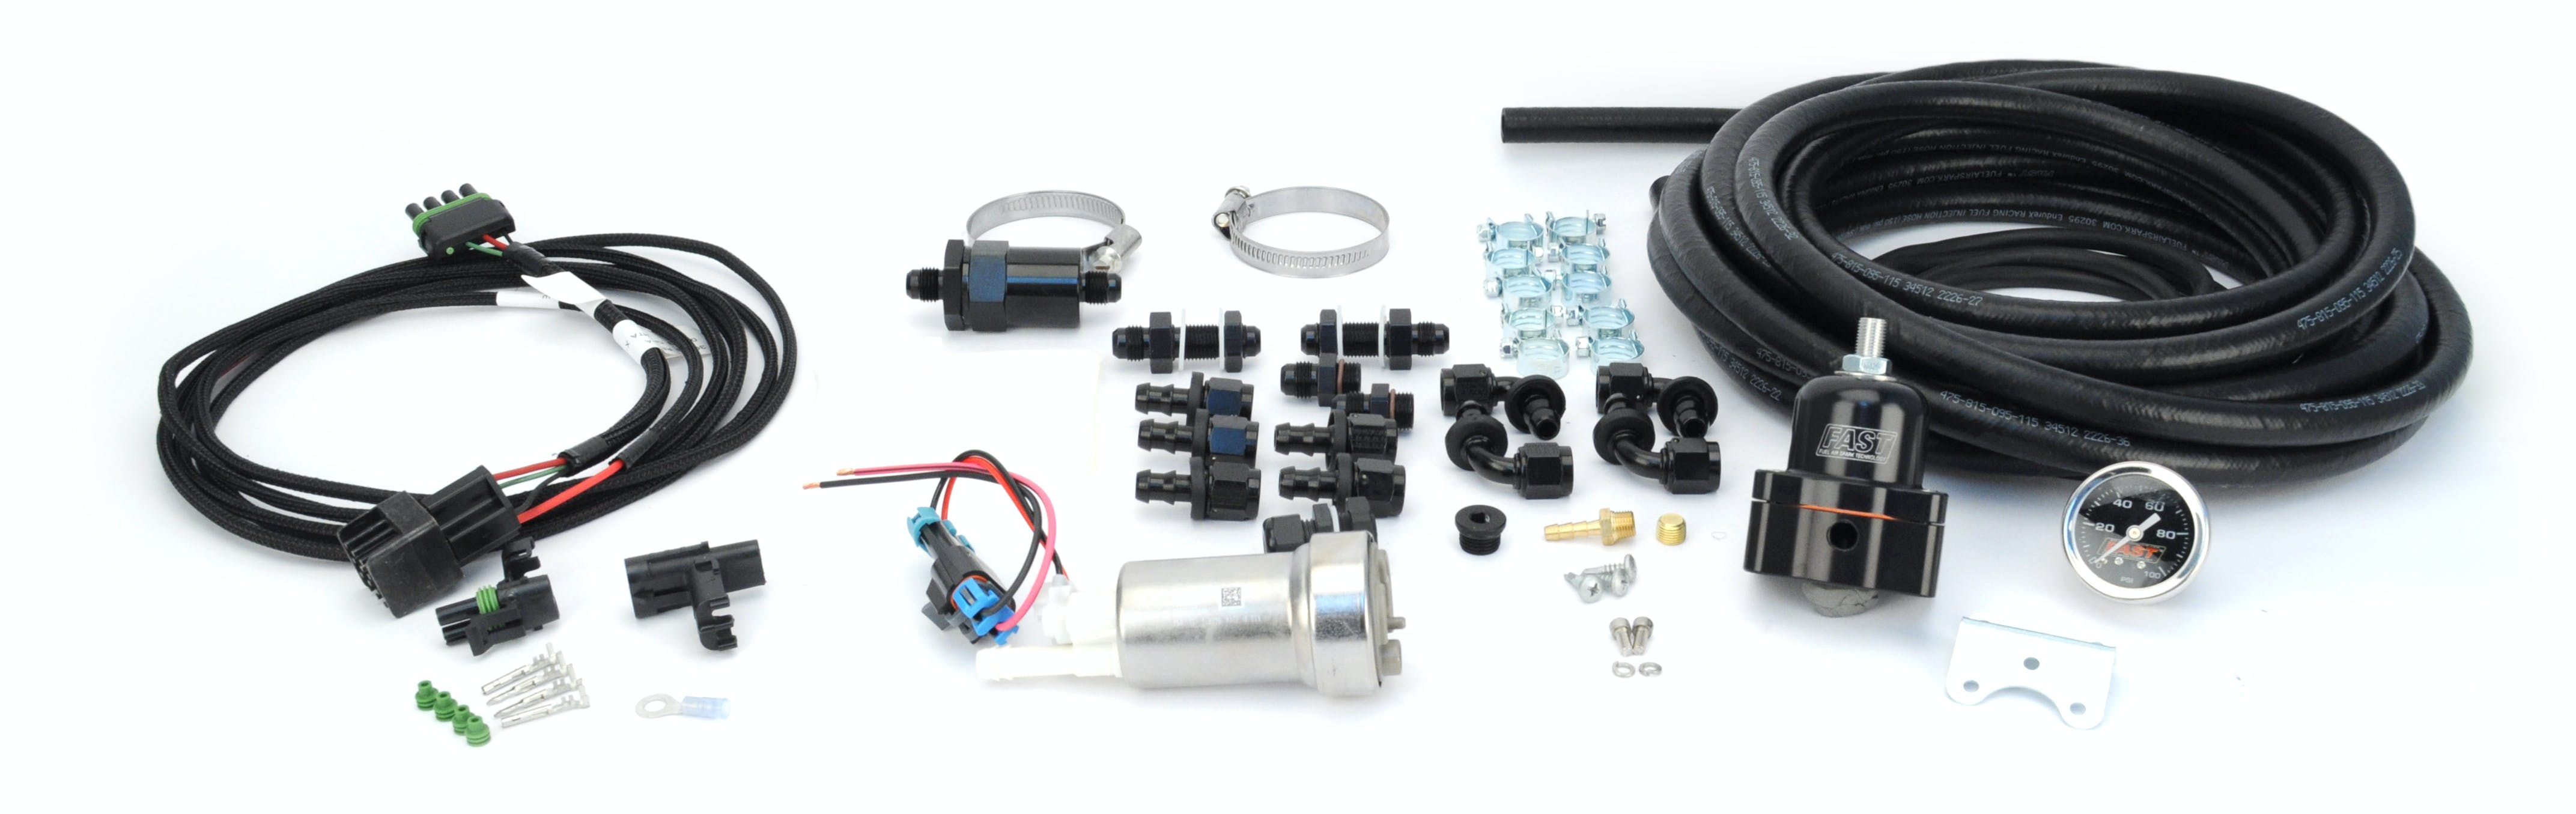 FAST - Fuel Air Spark Technology 30401-FK Master In-Tank Fuel Pump Kit (Includes Hose and Fittings)